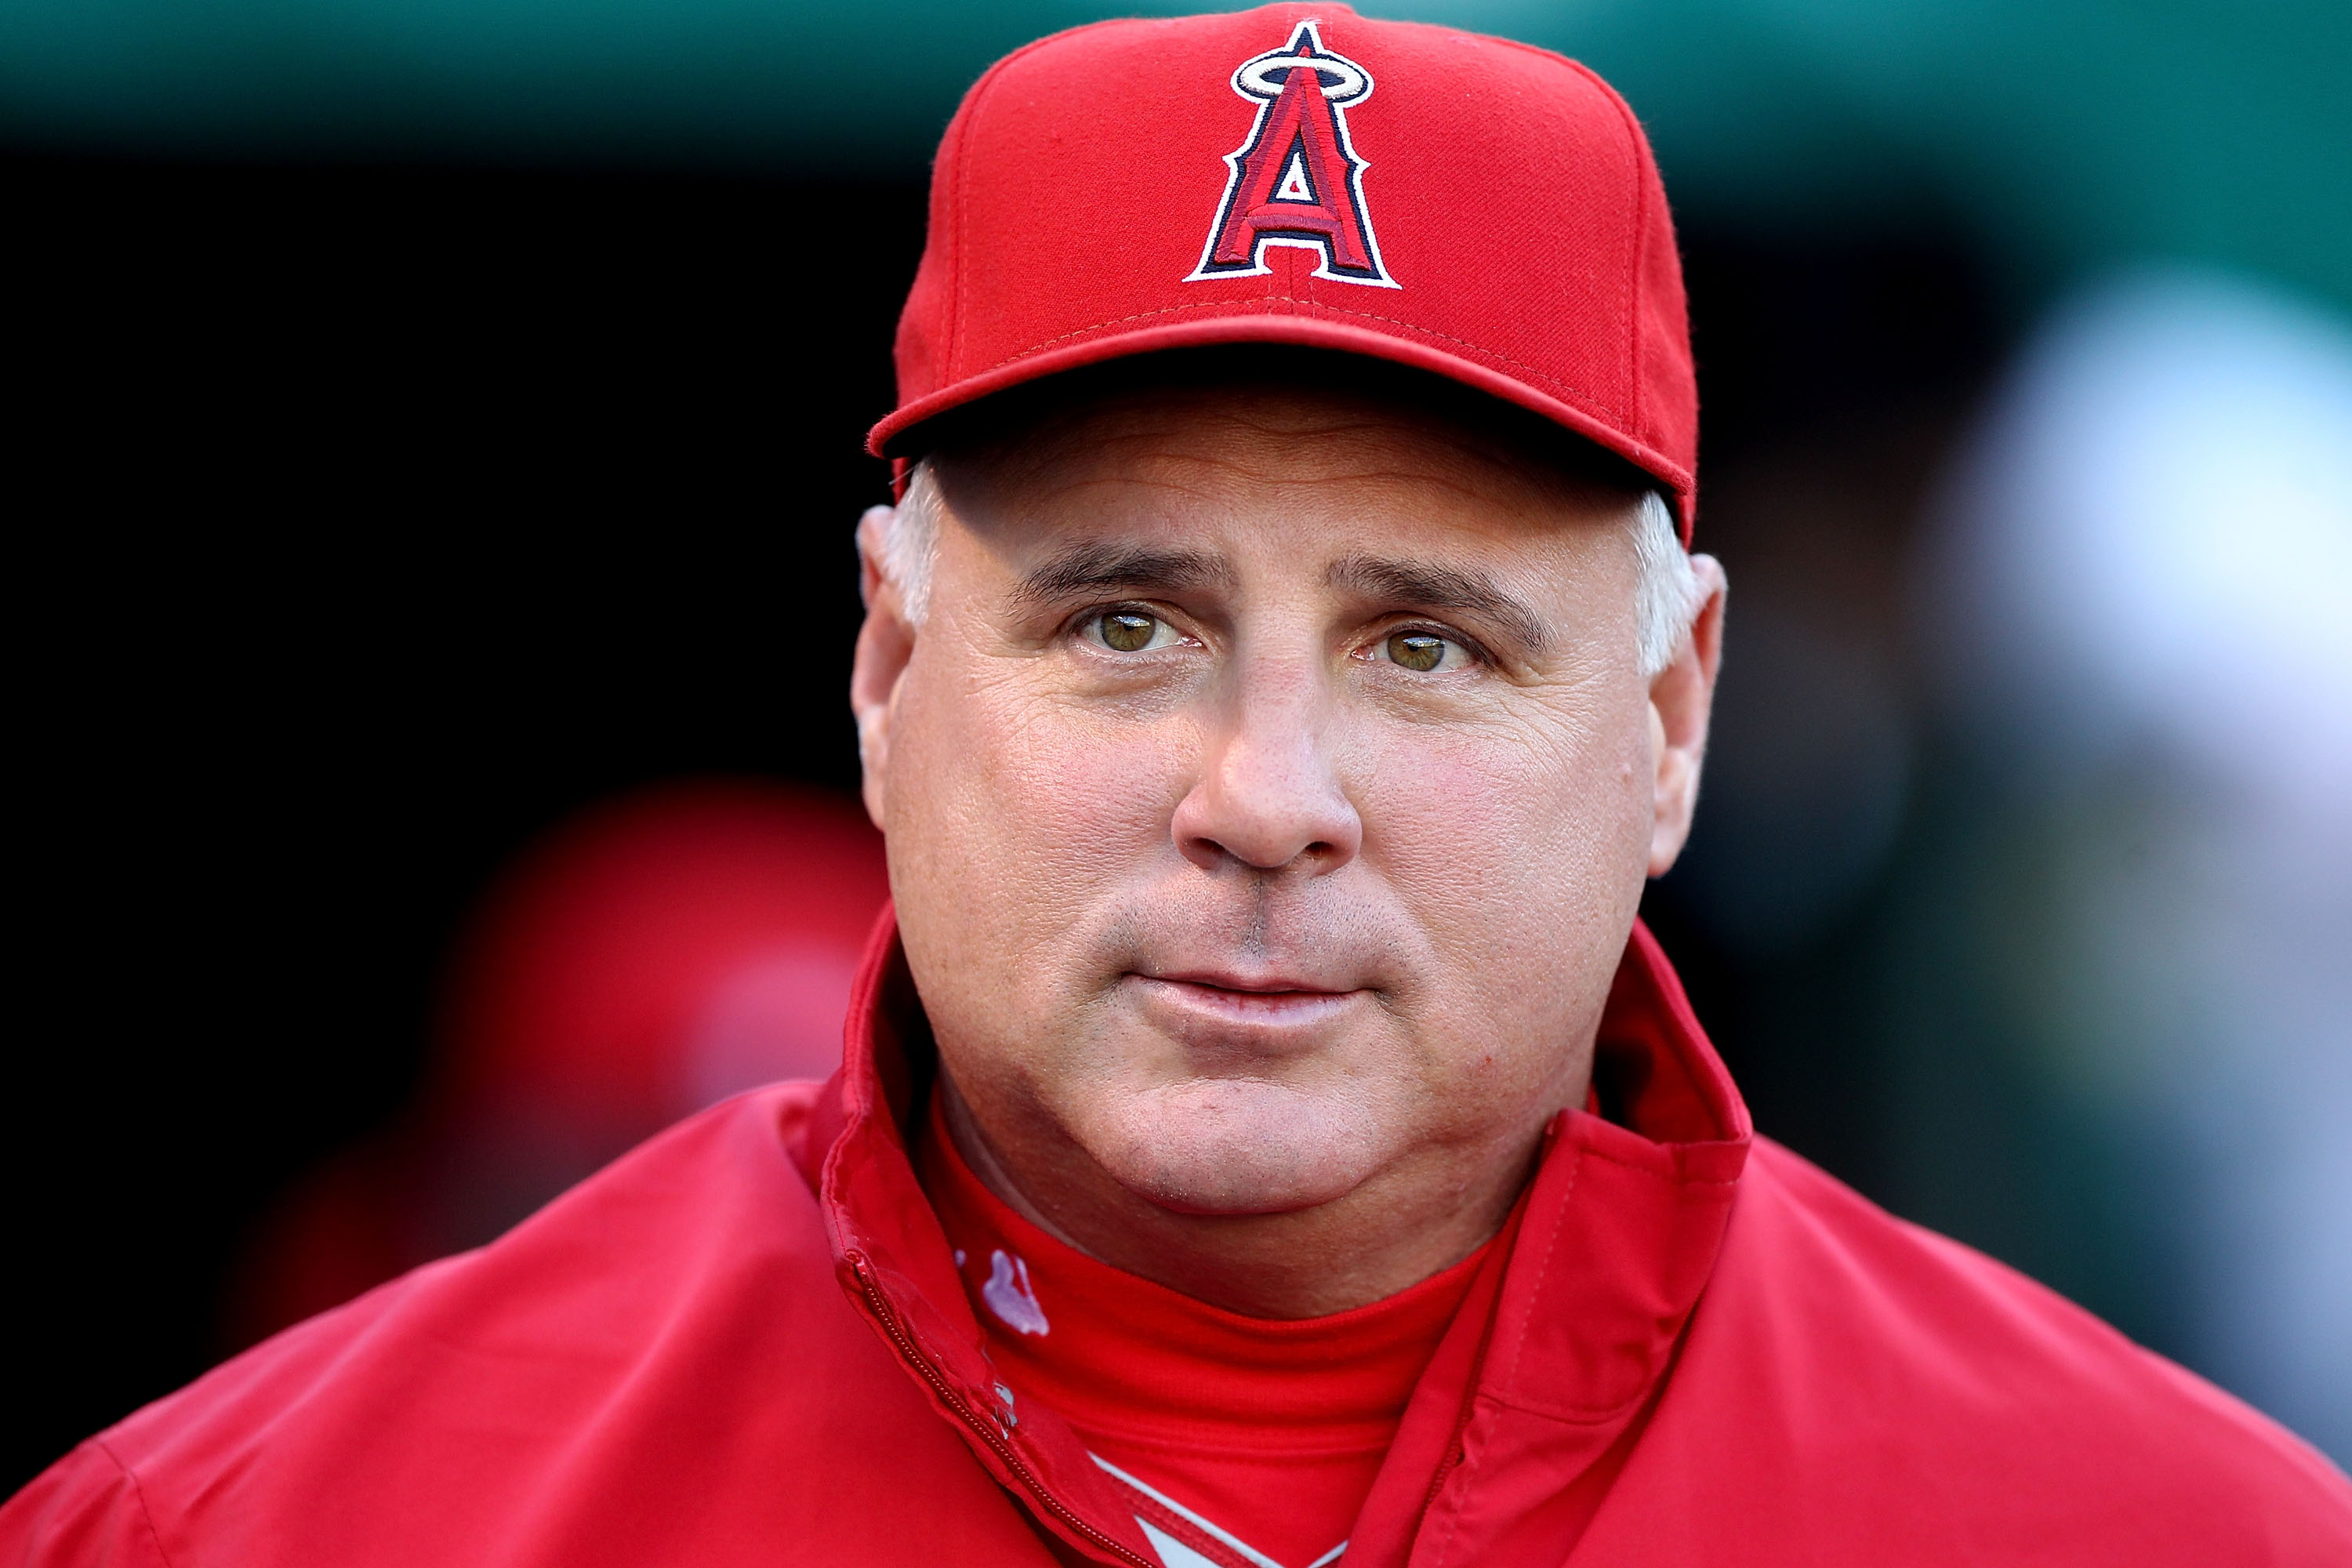 OAKLAND, CA - SEPTEMBER 3:  Manager Mike Scioscia of the Los Angeles Angels of Anaheim looks on against the Oakland Athletics during a Major League Baseball game at the Oakland-Alameda County Coliseum on September 3, 2010 in Oakland, California. (Photo by